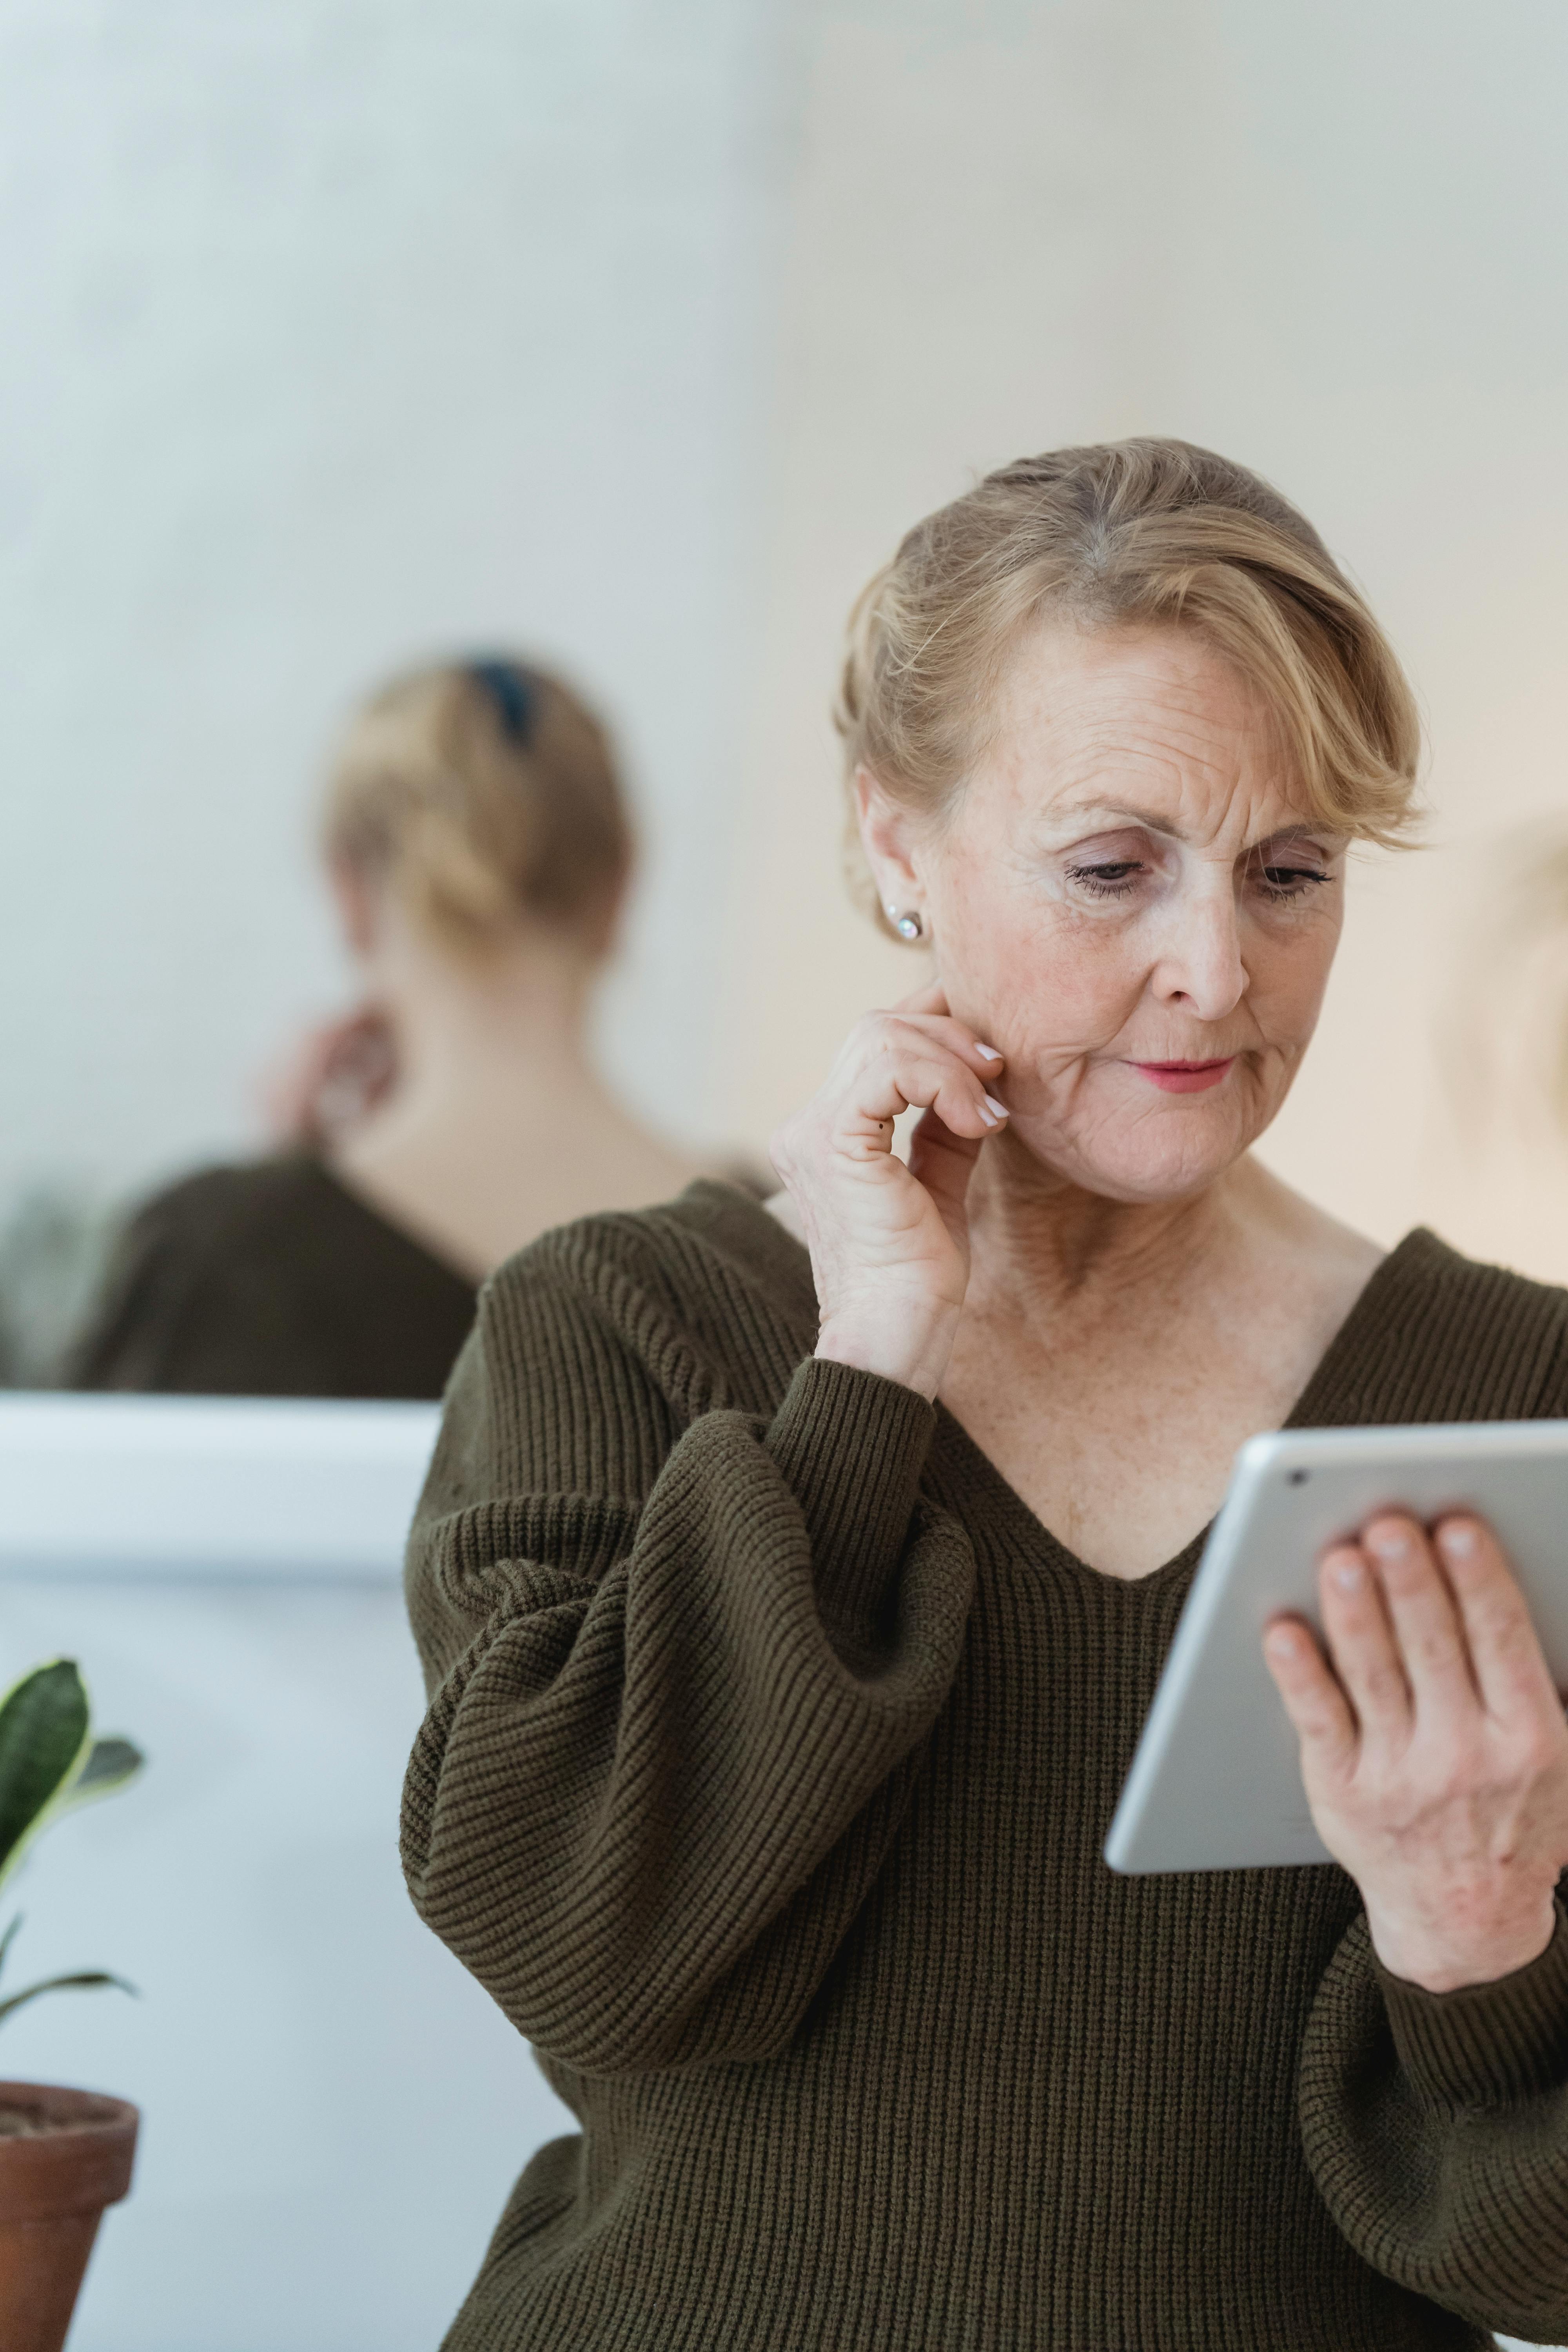 A middle-aged woman using a tablet in her free time | Source: Pexels